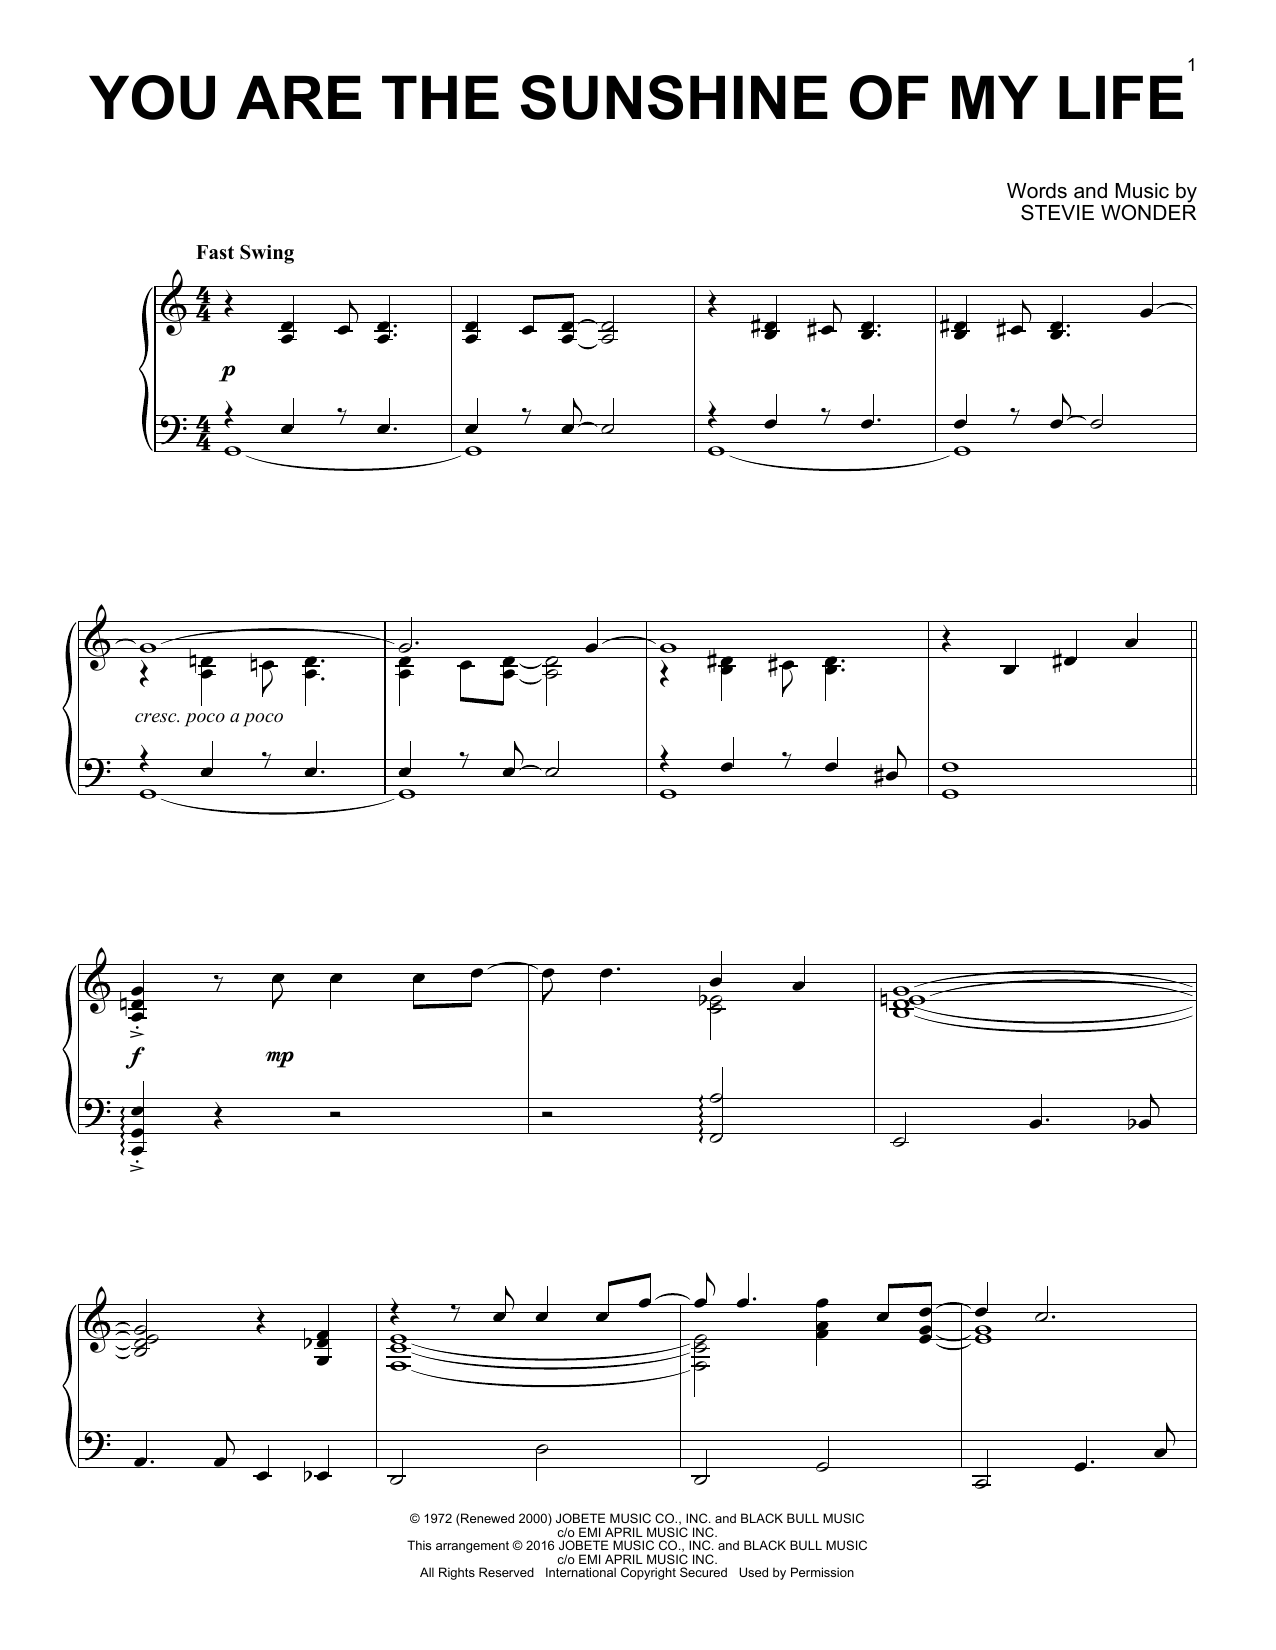 Download Stevie Wonder You Are The Sunshine Of My Life [Jazz v Sheet Music